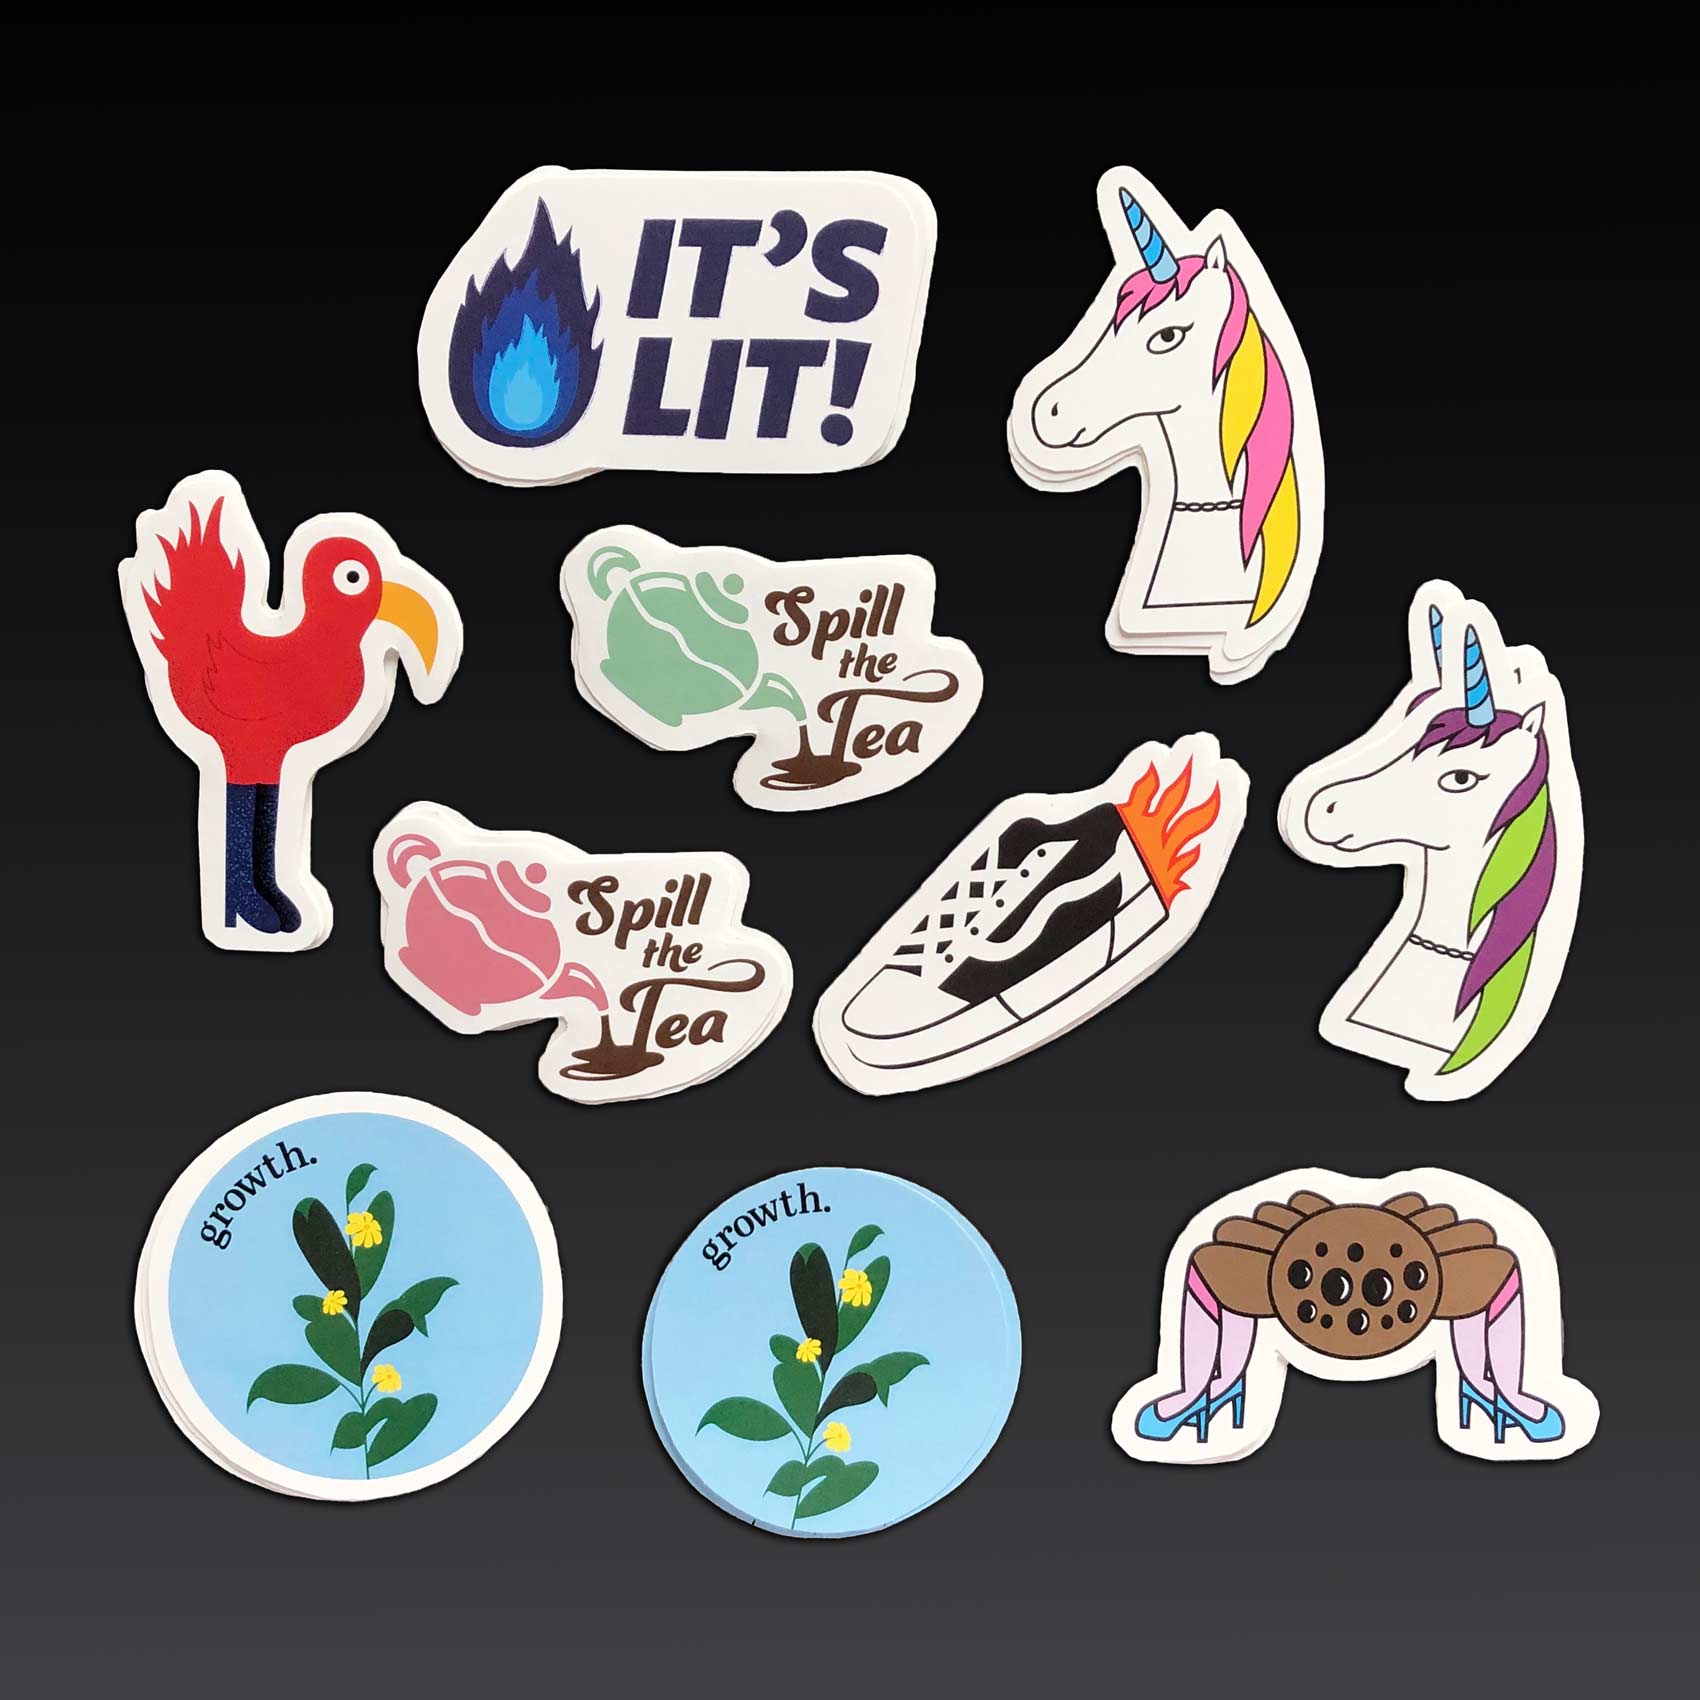 This is an image of the 9 sticker designs that I've actually gotten printed.